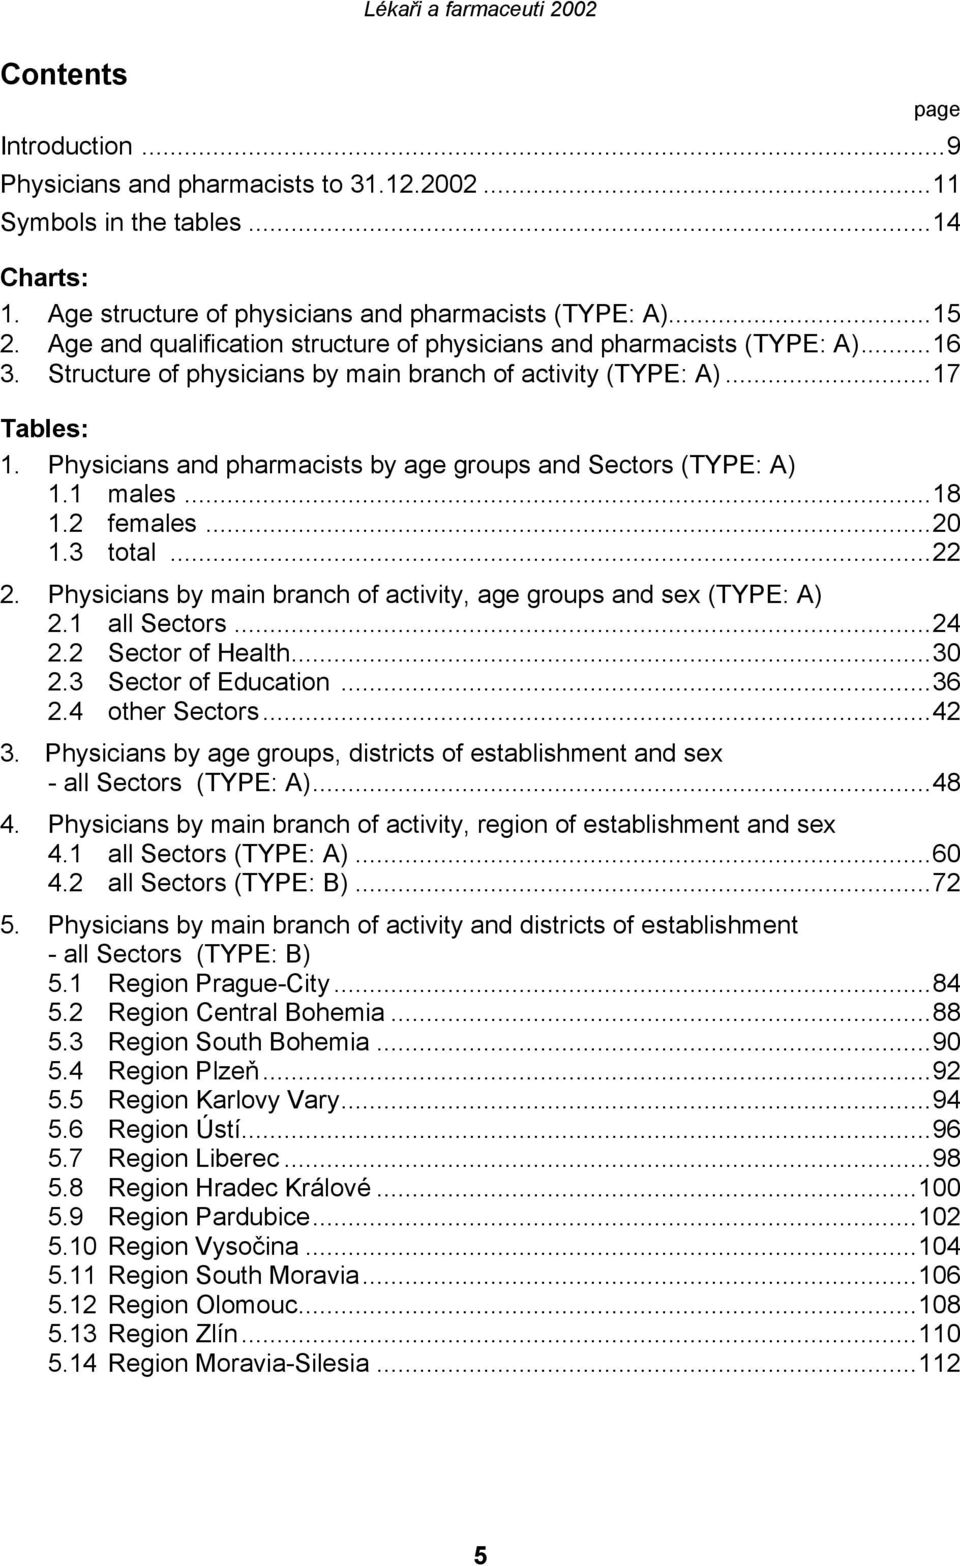 Physicians and pharmacists by age groups and Sectors (TYPE: A) 1.1 males...18 1.2 females...20 1.3 total...22 2. Physicians by main branch of activity, age groups and sex (TYPE: A) 2.1 all Sectors.